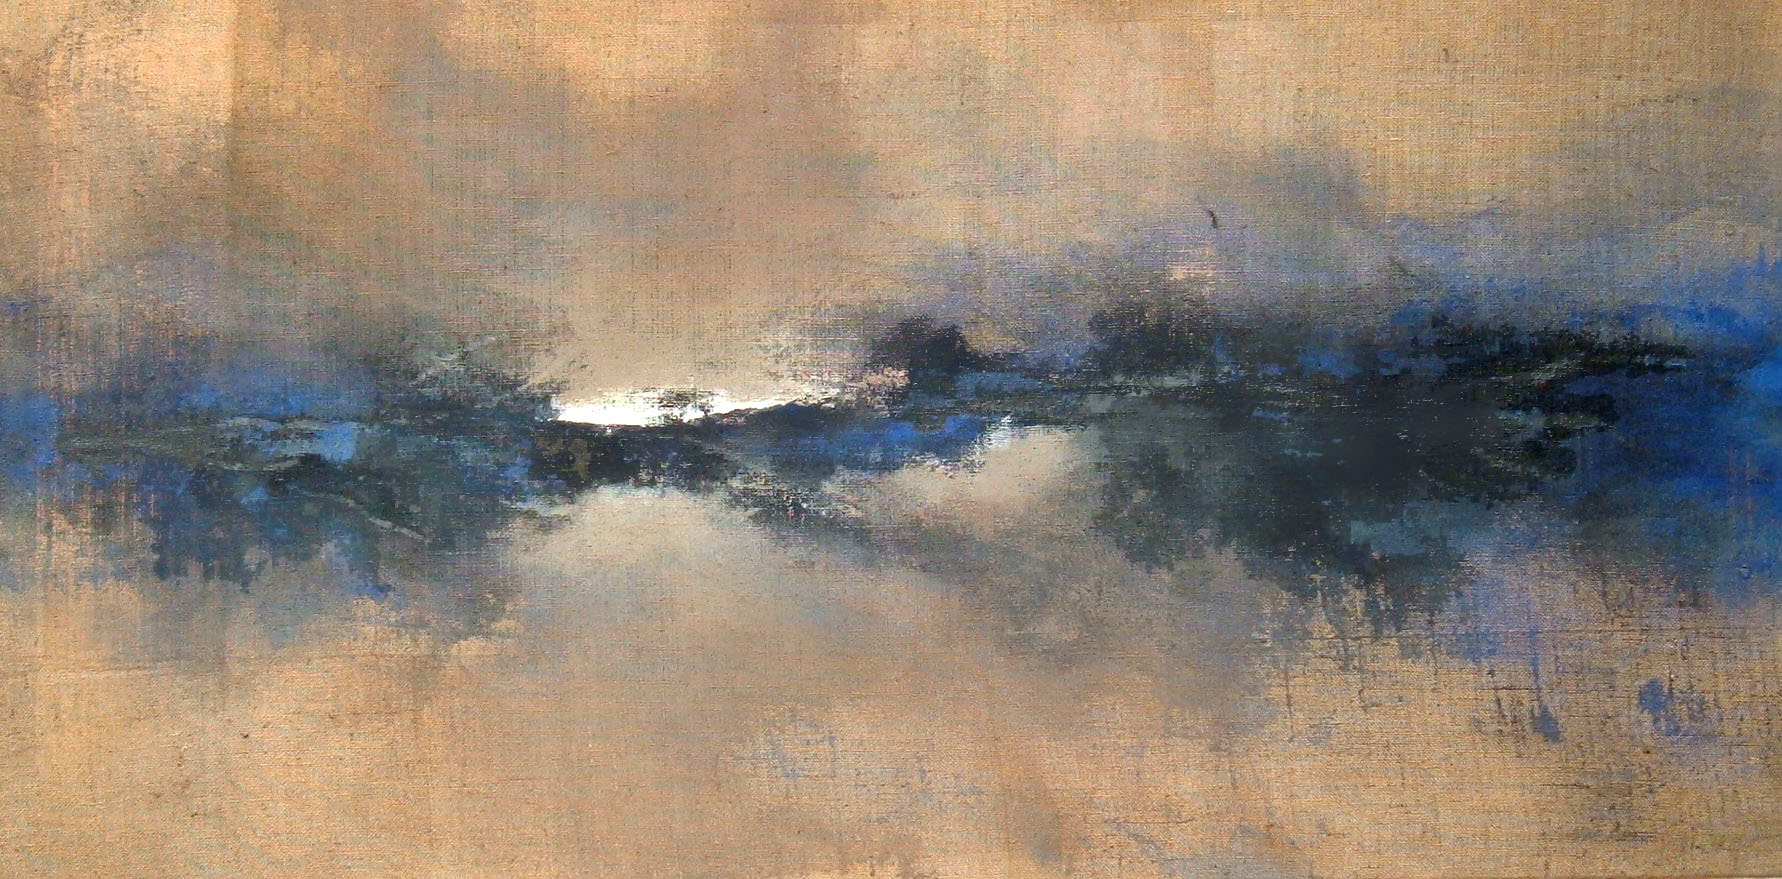 Seascapes : The Works  of Sergio Aiello contemporary visual artist of Abstract Contemporary Landscape Paintings at https://www.sergioaiello.com